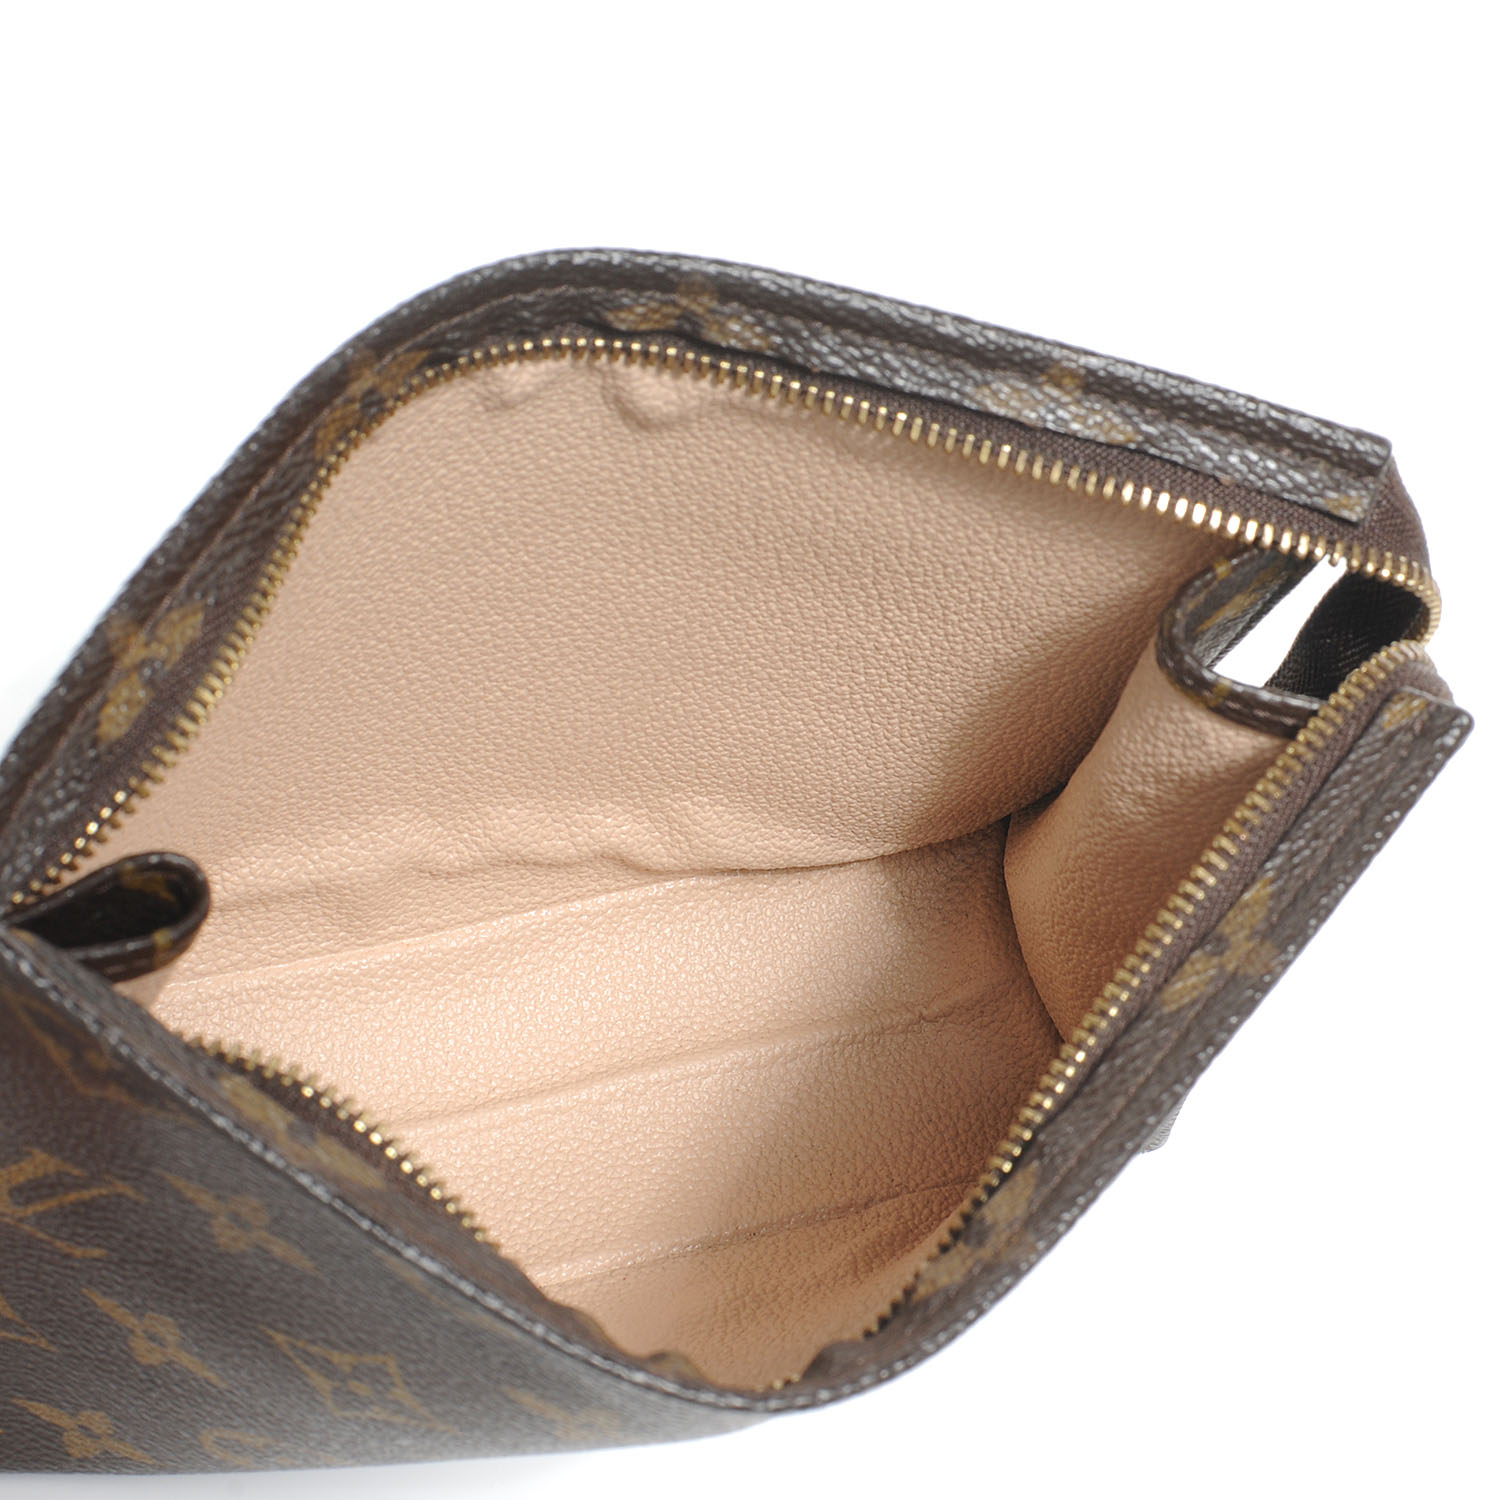  Vercord Purse Insert Organizer 26 Toiletry Pouch Insert with  Leopard Acrylic Chain Strap Beige L : Clothing, Shoes & Jewelry